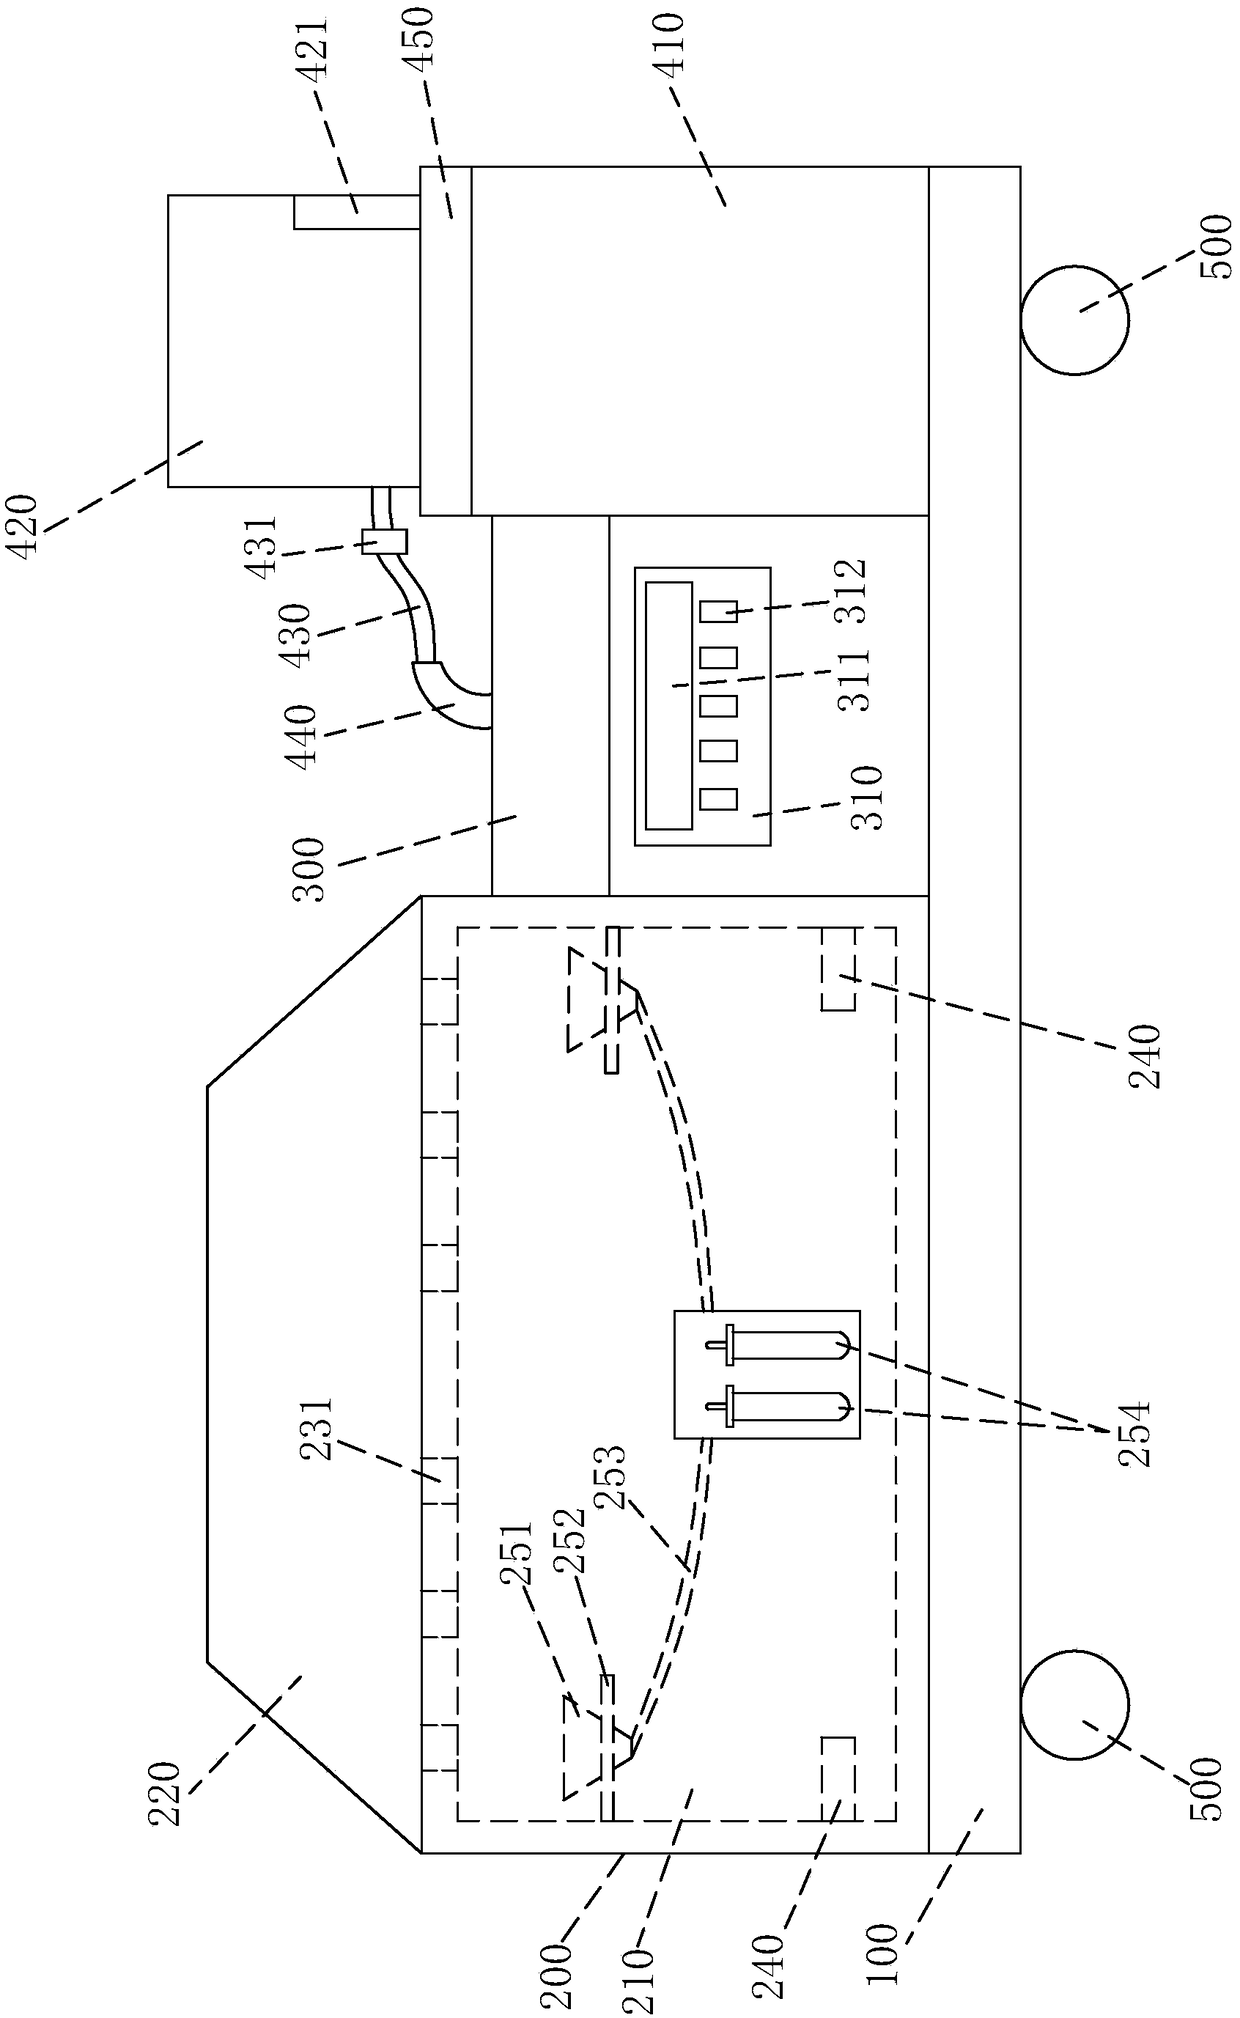 Salt spray test device capable of performing feeding automatically for detecting wall washer light